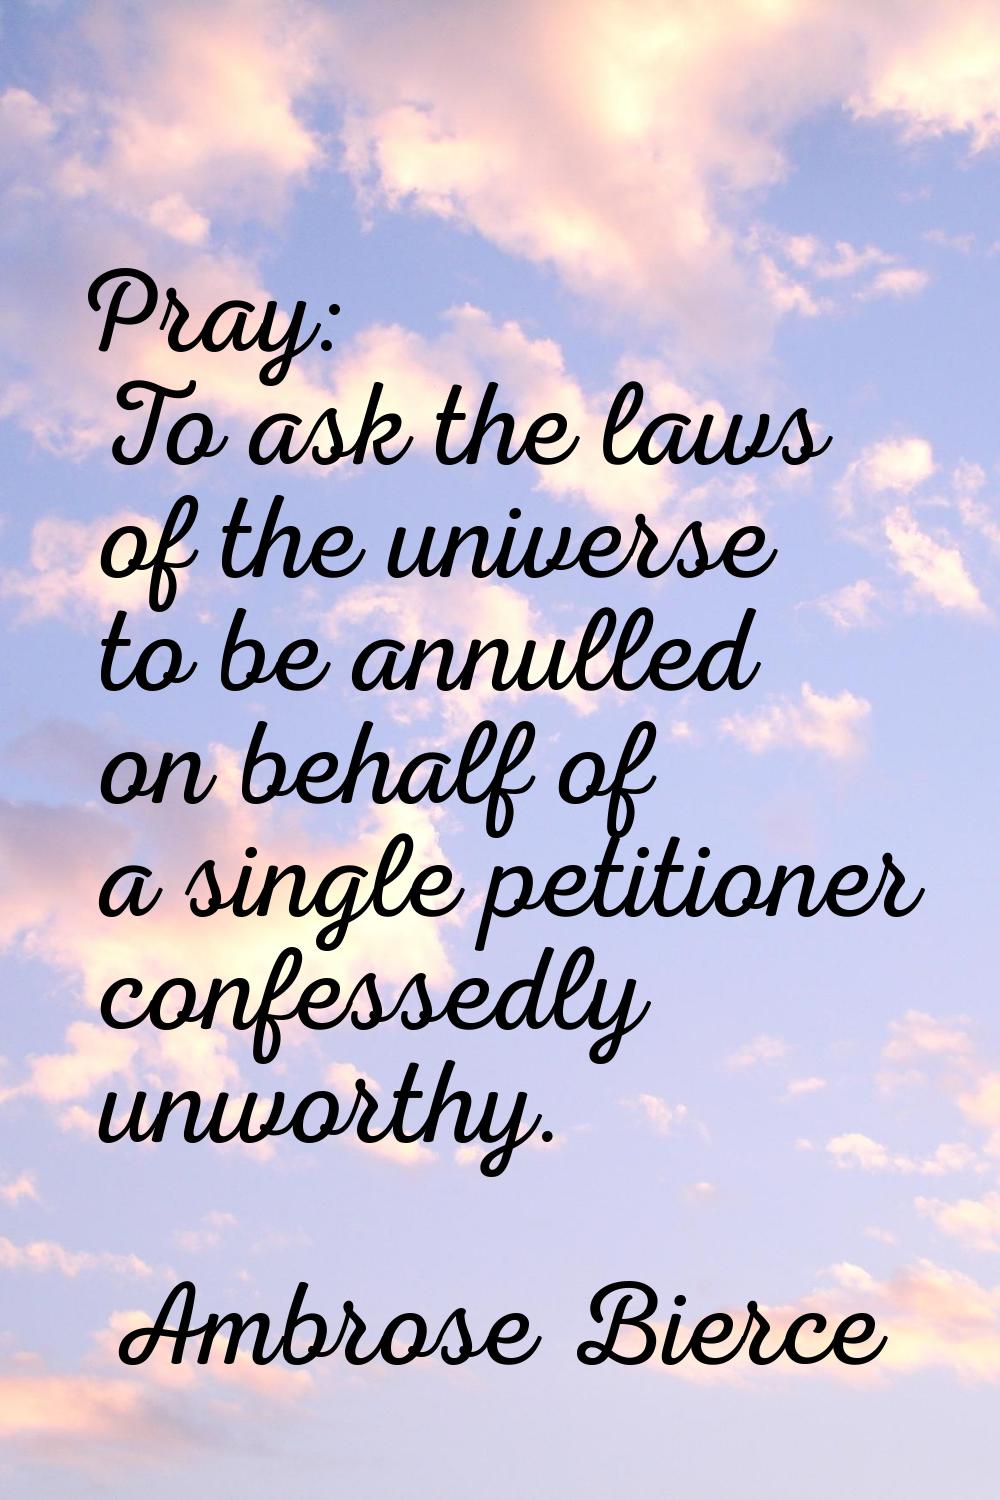 Pray: To ask the laws of the universe to be annulled on behalf of a single petitioner confessedly u